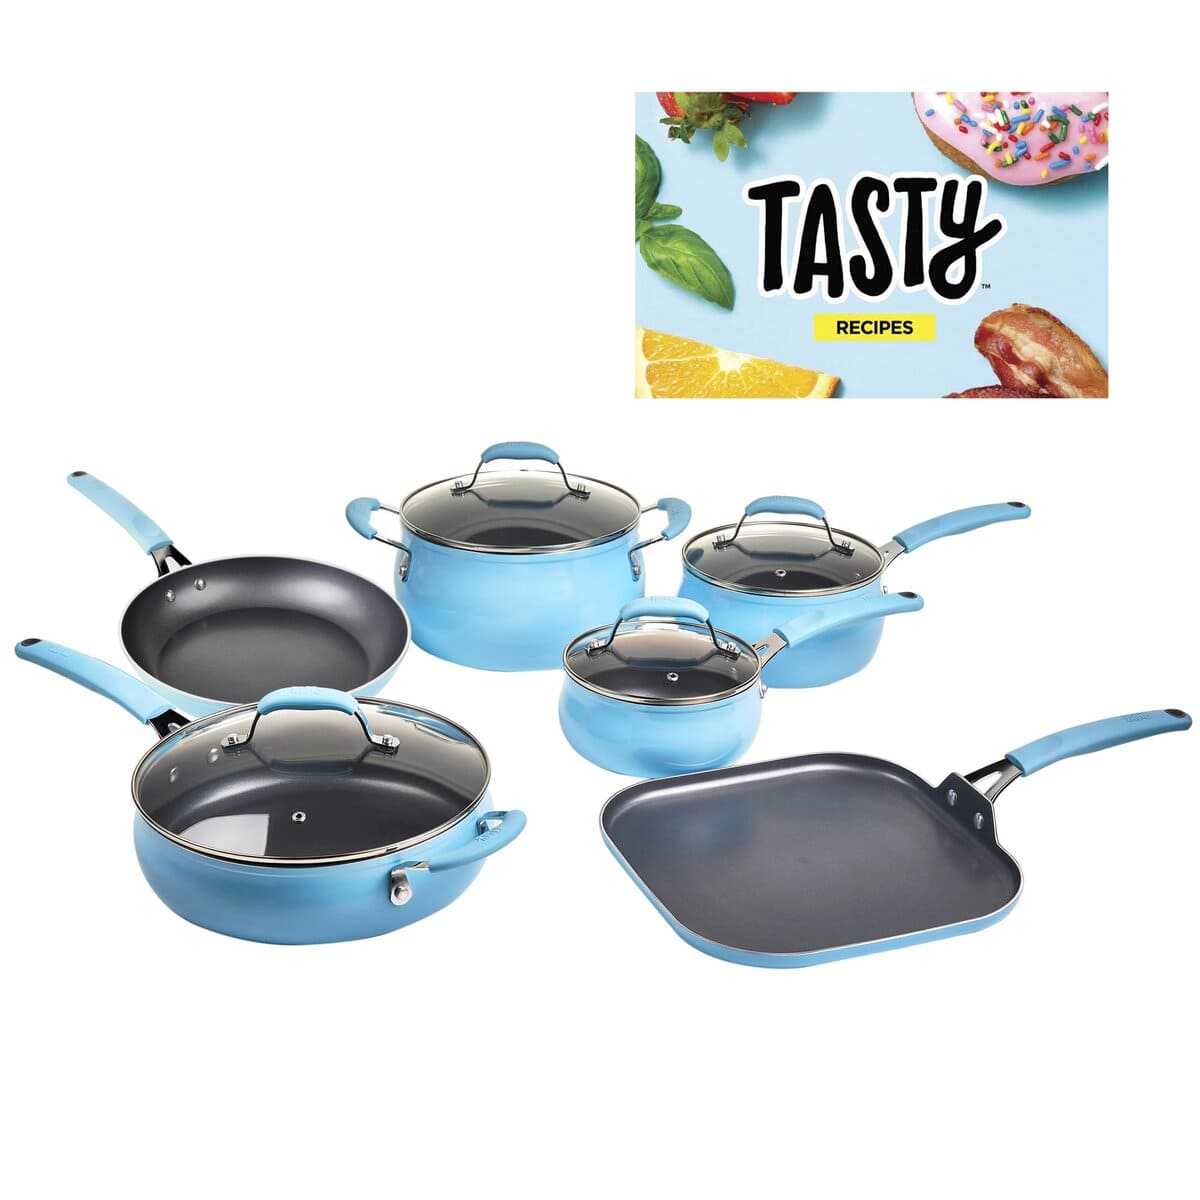 tips for using and maintaining the tasty non-stick diamond reinforced cookware set 11 piece